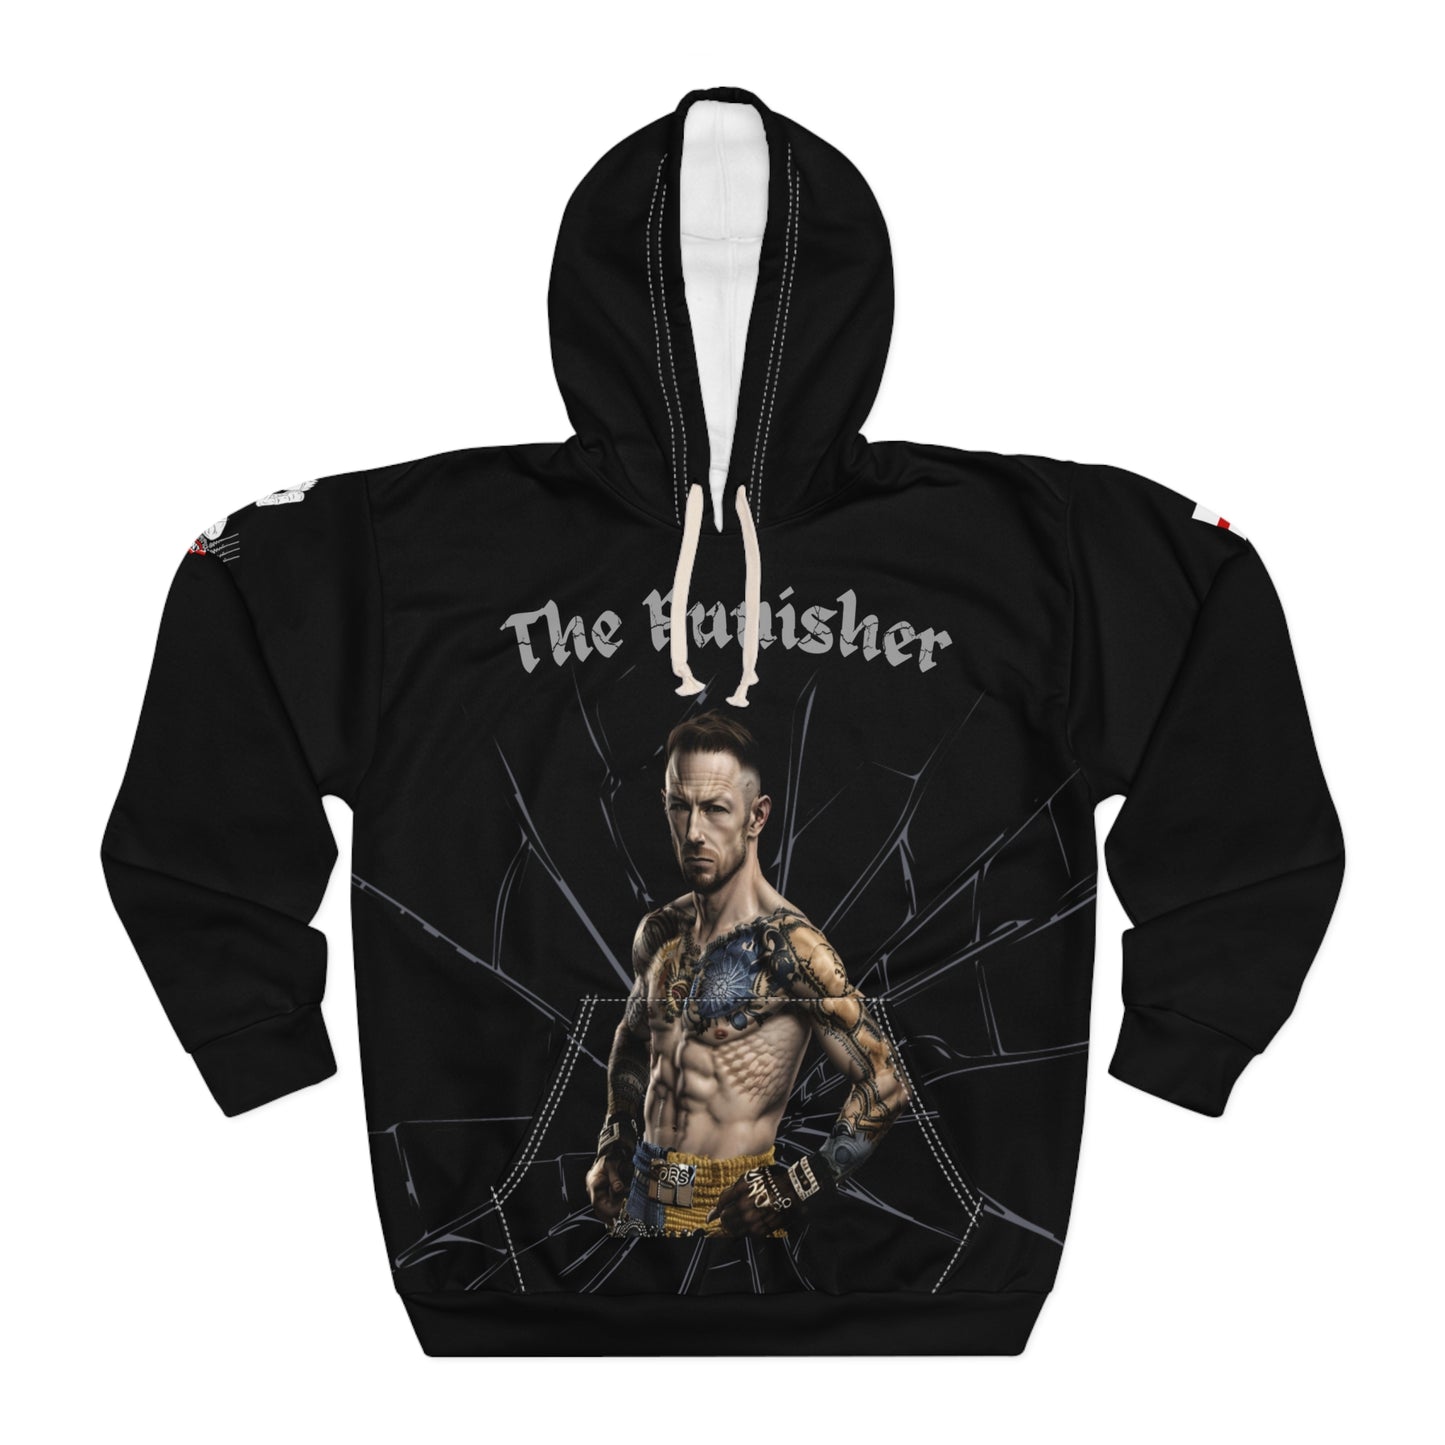 ANDY HOWSON "The Punisher" Premium Hoodie